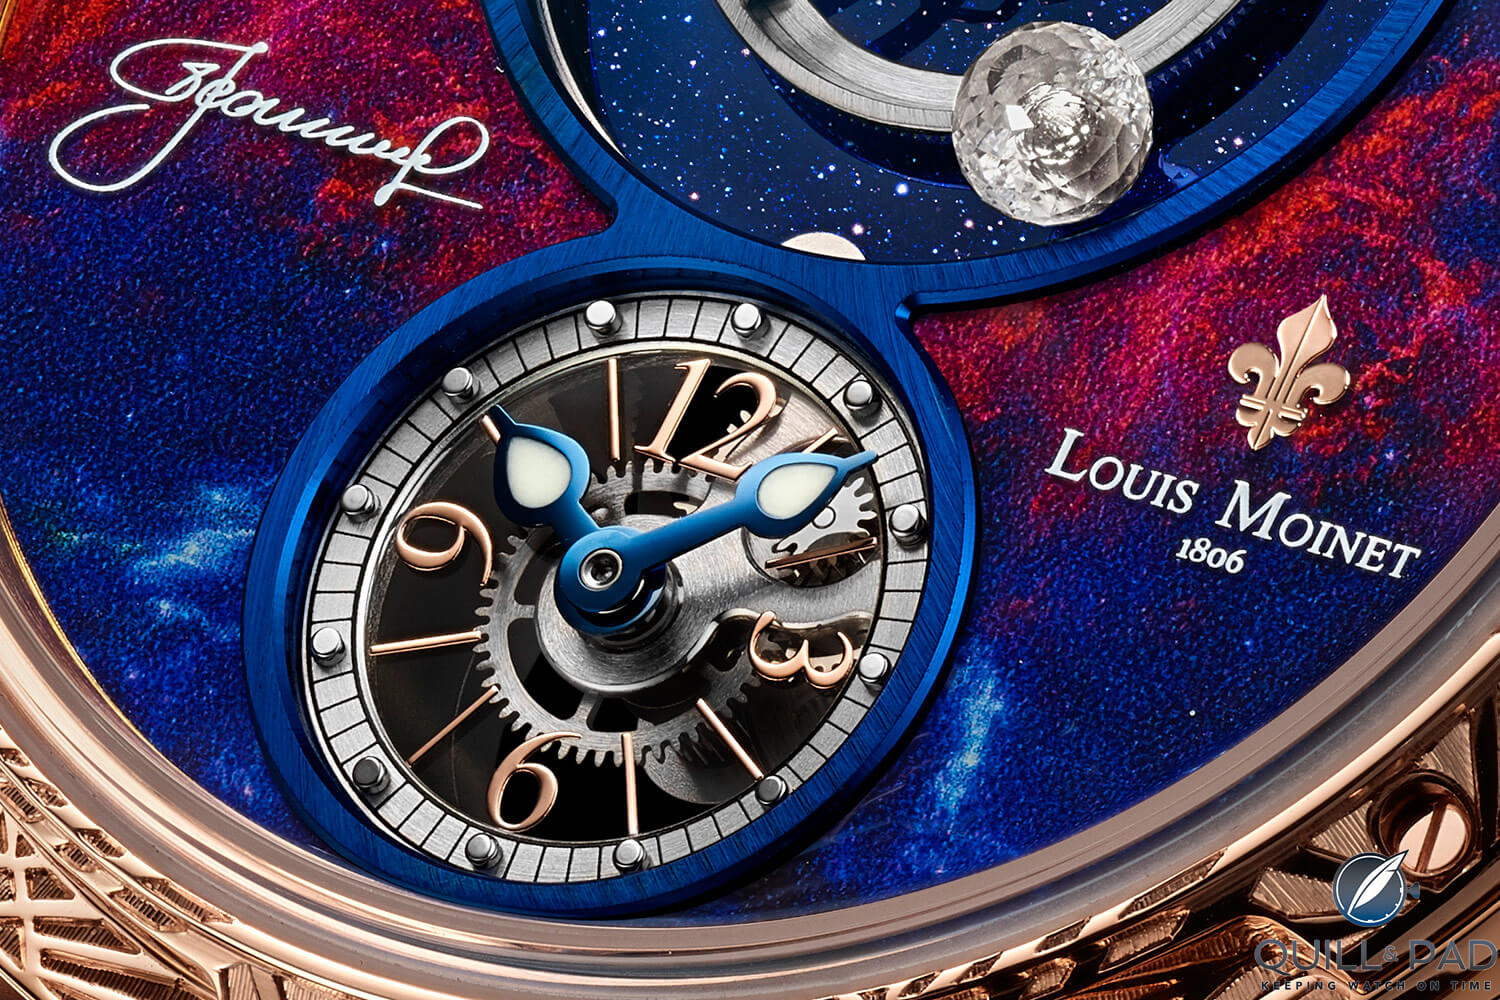 Time display subdial of the Louis Moinet Spacewalker